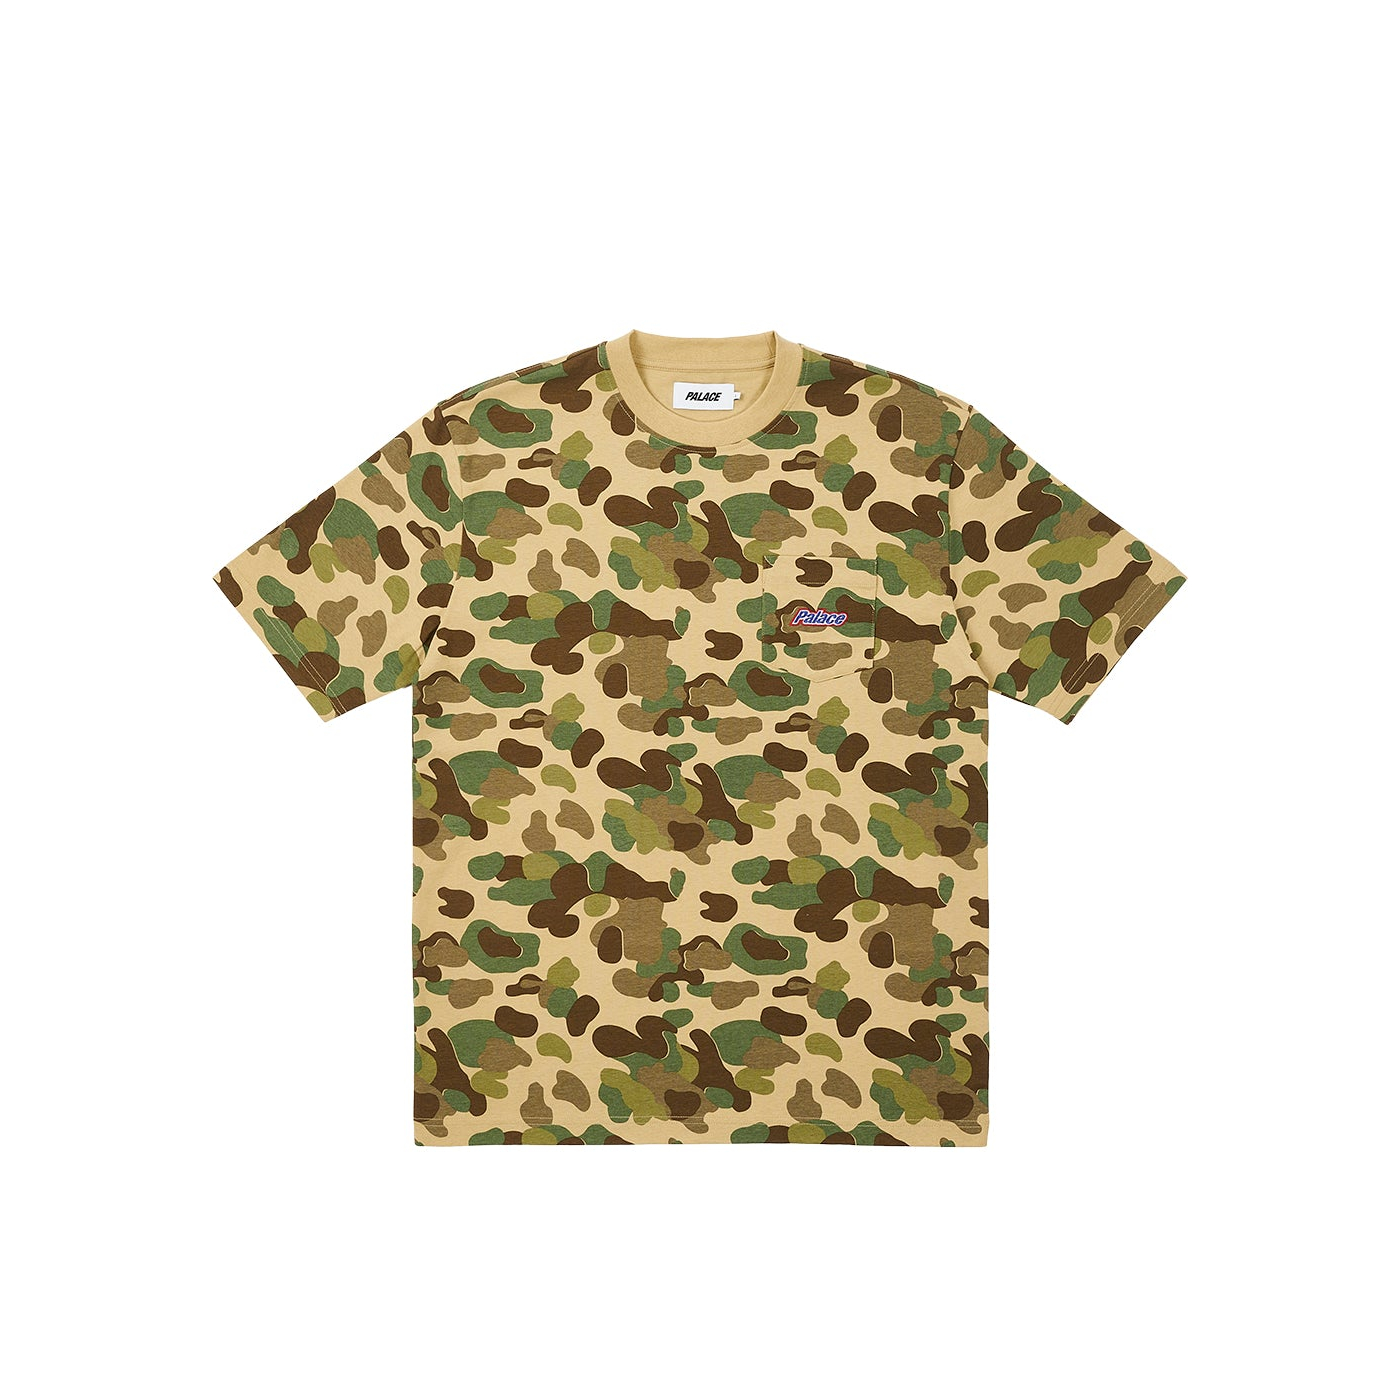 Thumbnail EMBROIDERED POCKET T-SHIRT DUCK CAMO one color